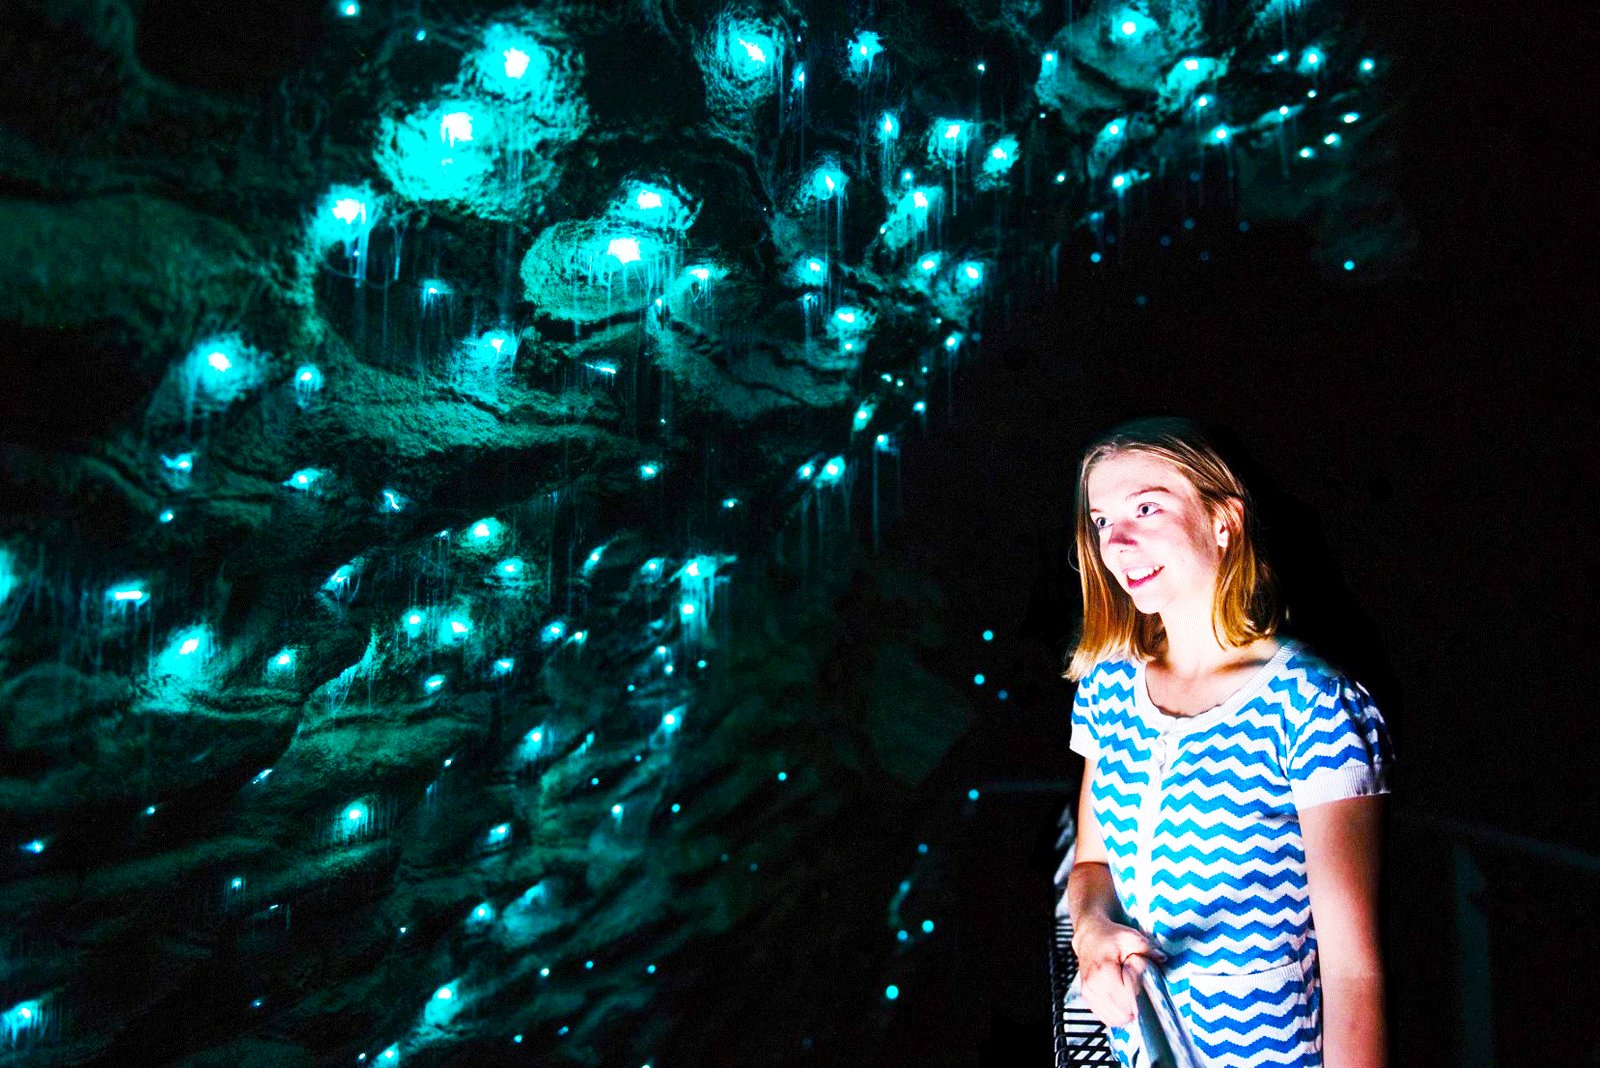 How to get into the glow worm cave in Hamilton